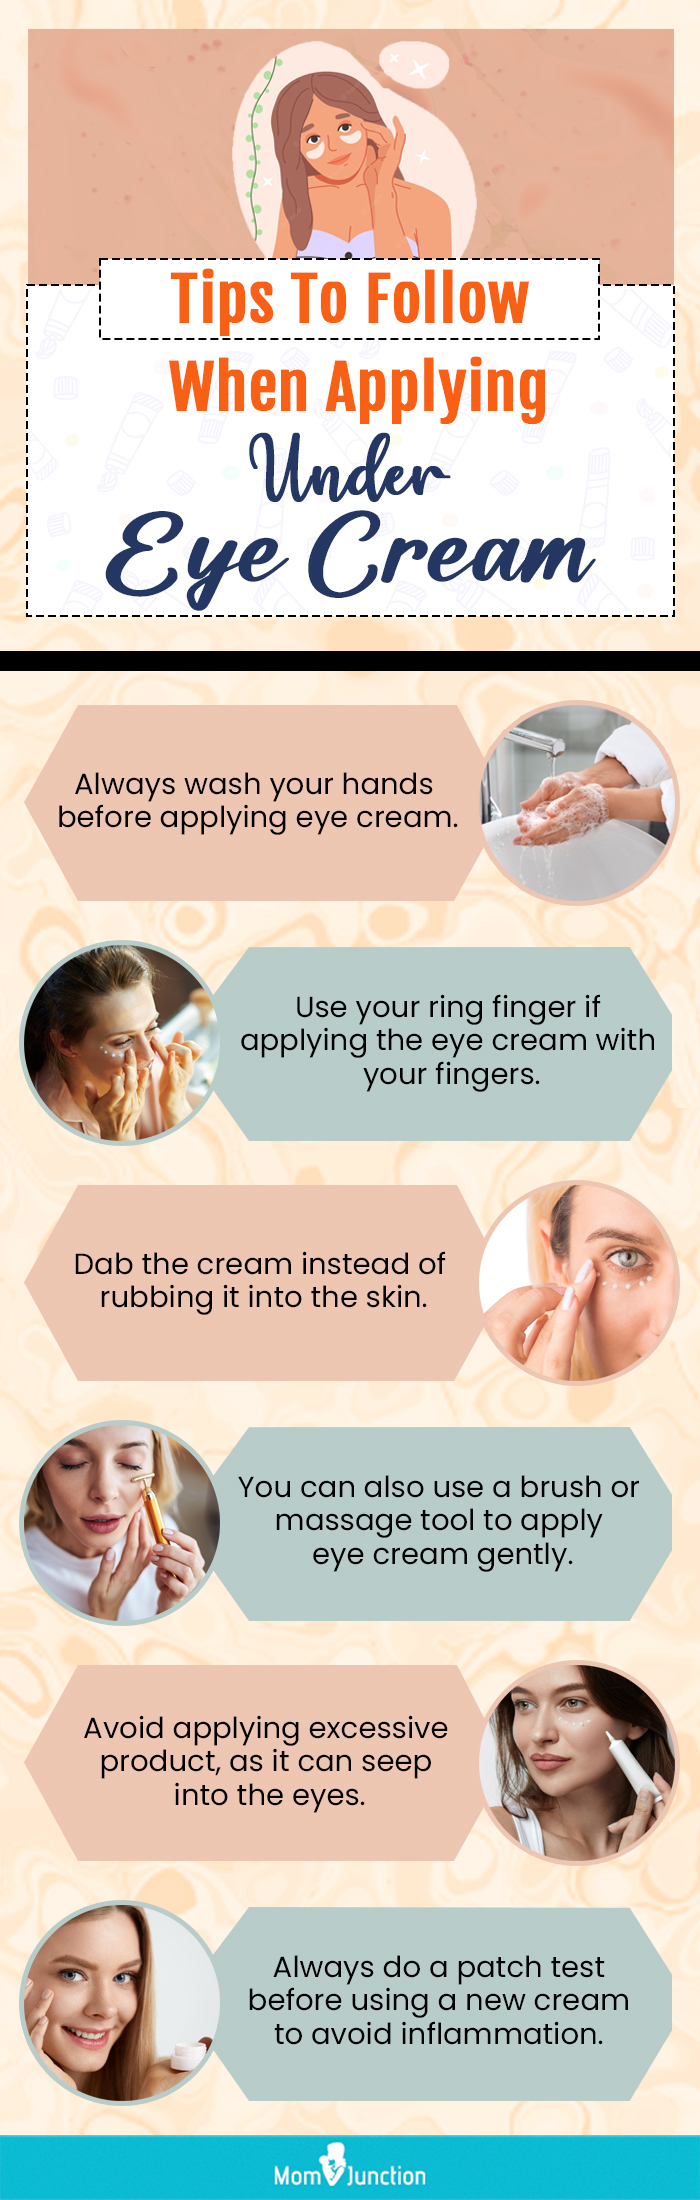 Tips To Follow When Applying Under Eye Cream (Infographic)